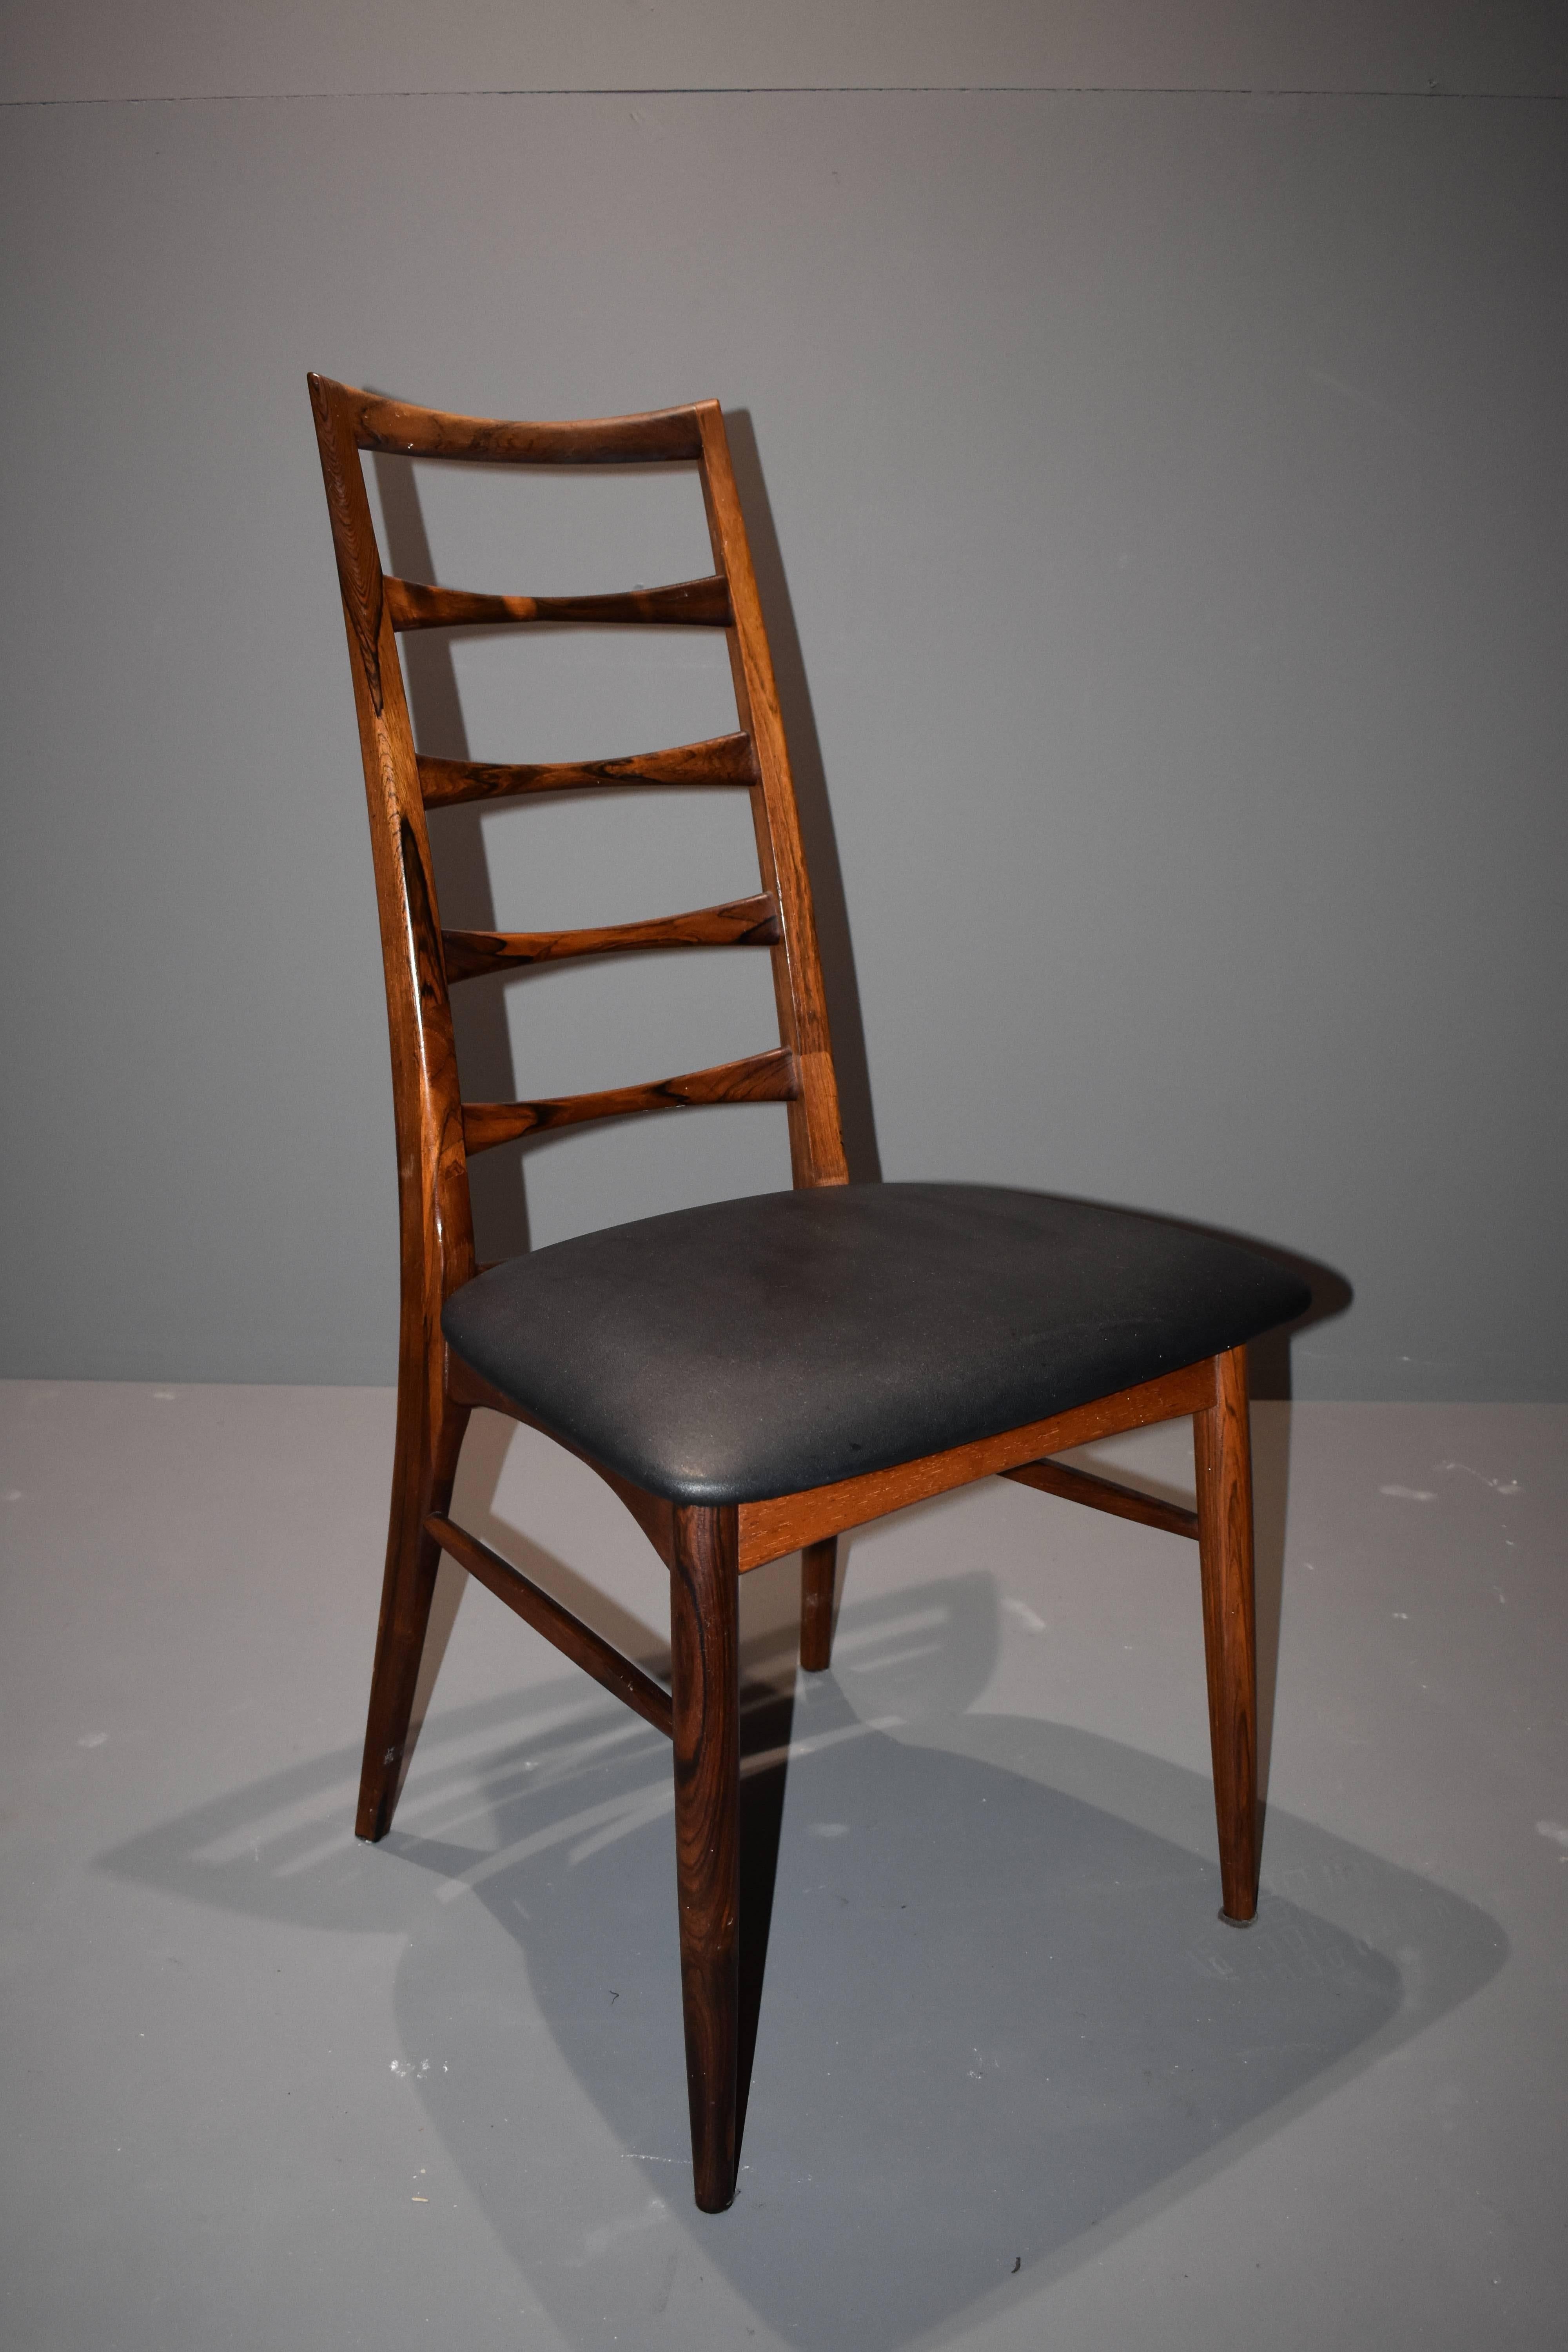 Set of six beautíful rosewood chairs designed by Niels Kofod Larsen.
Upholstery in original back leather.